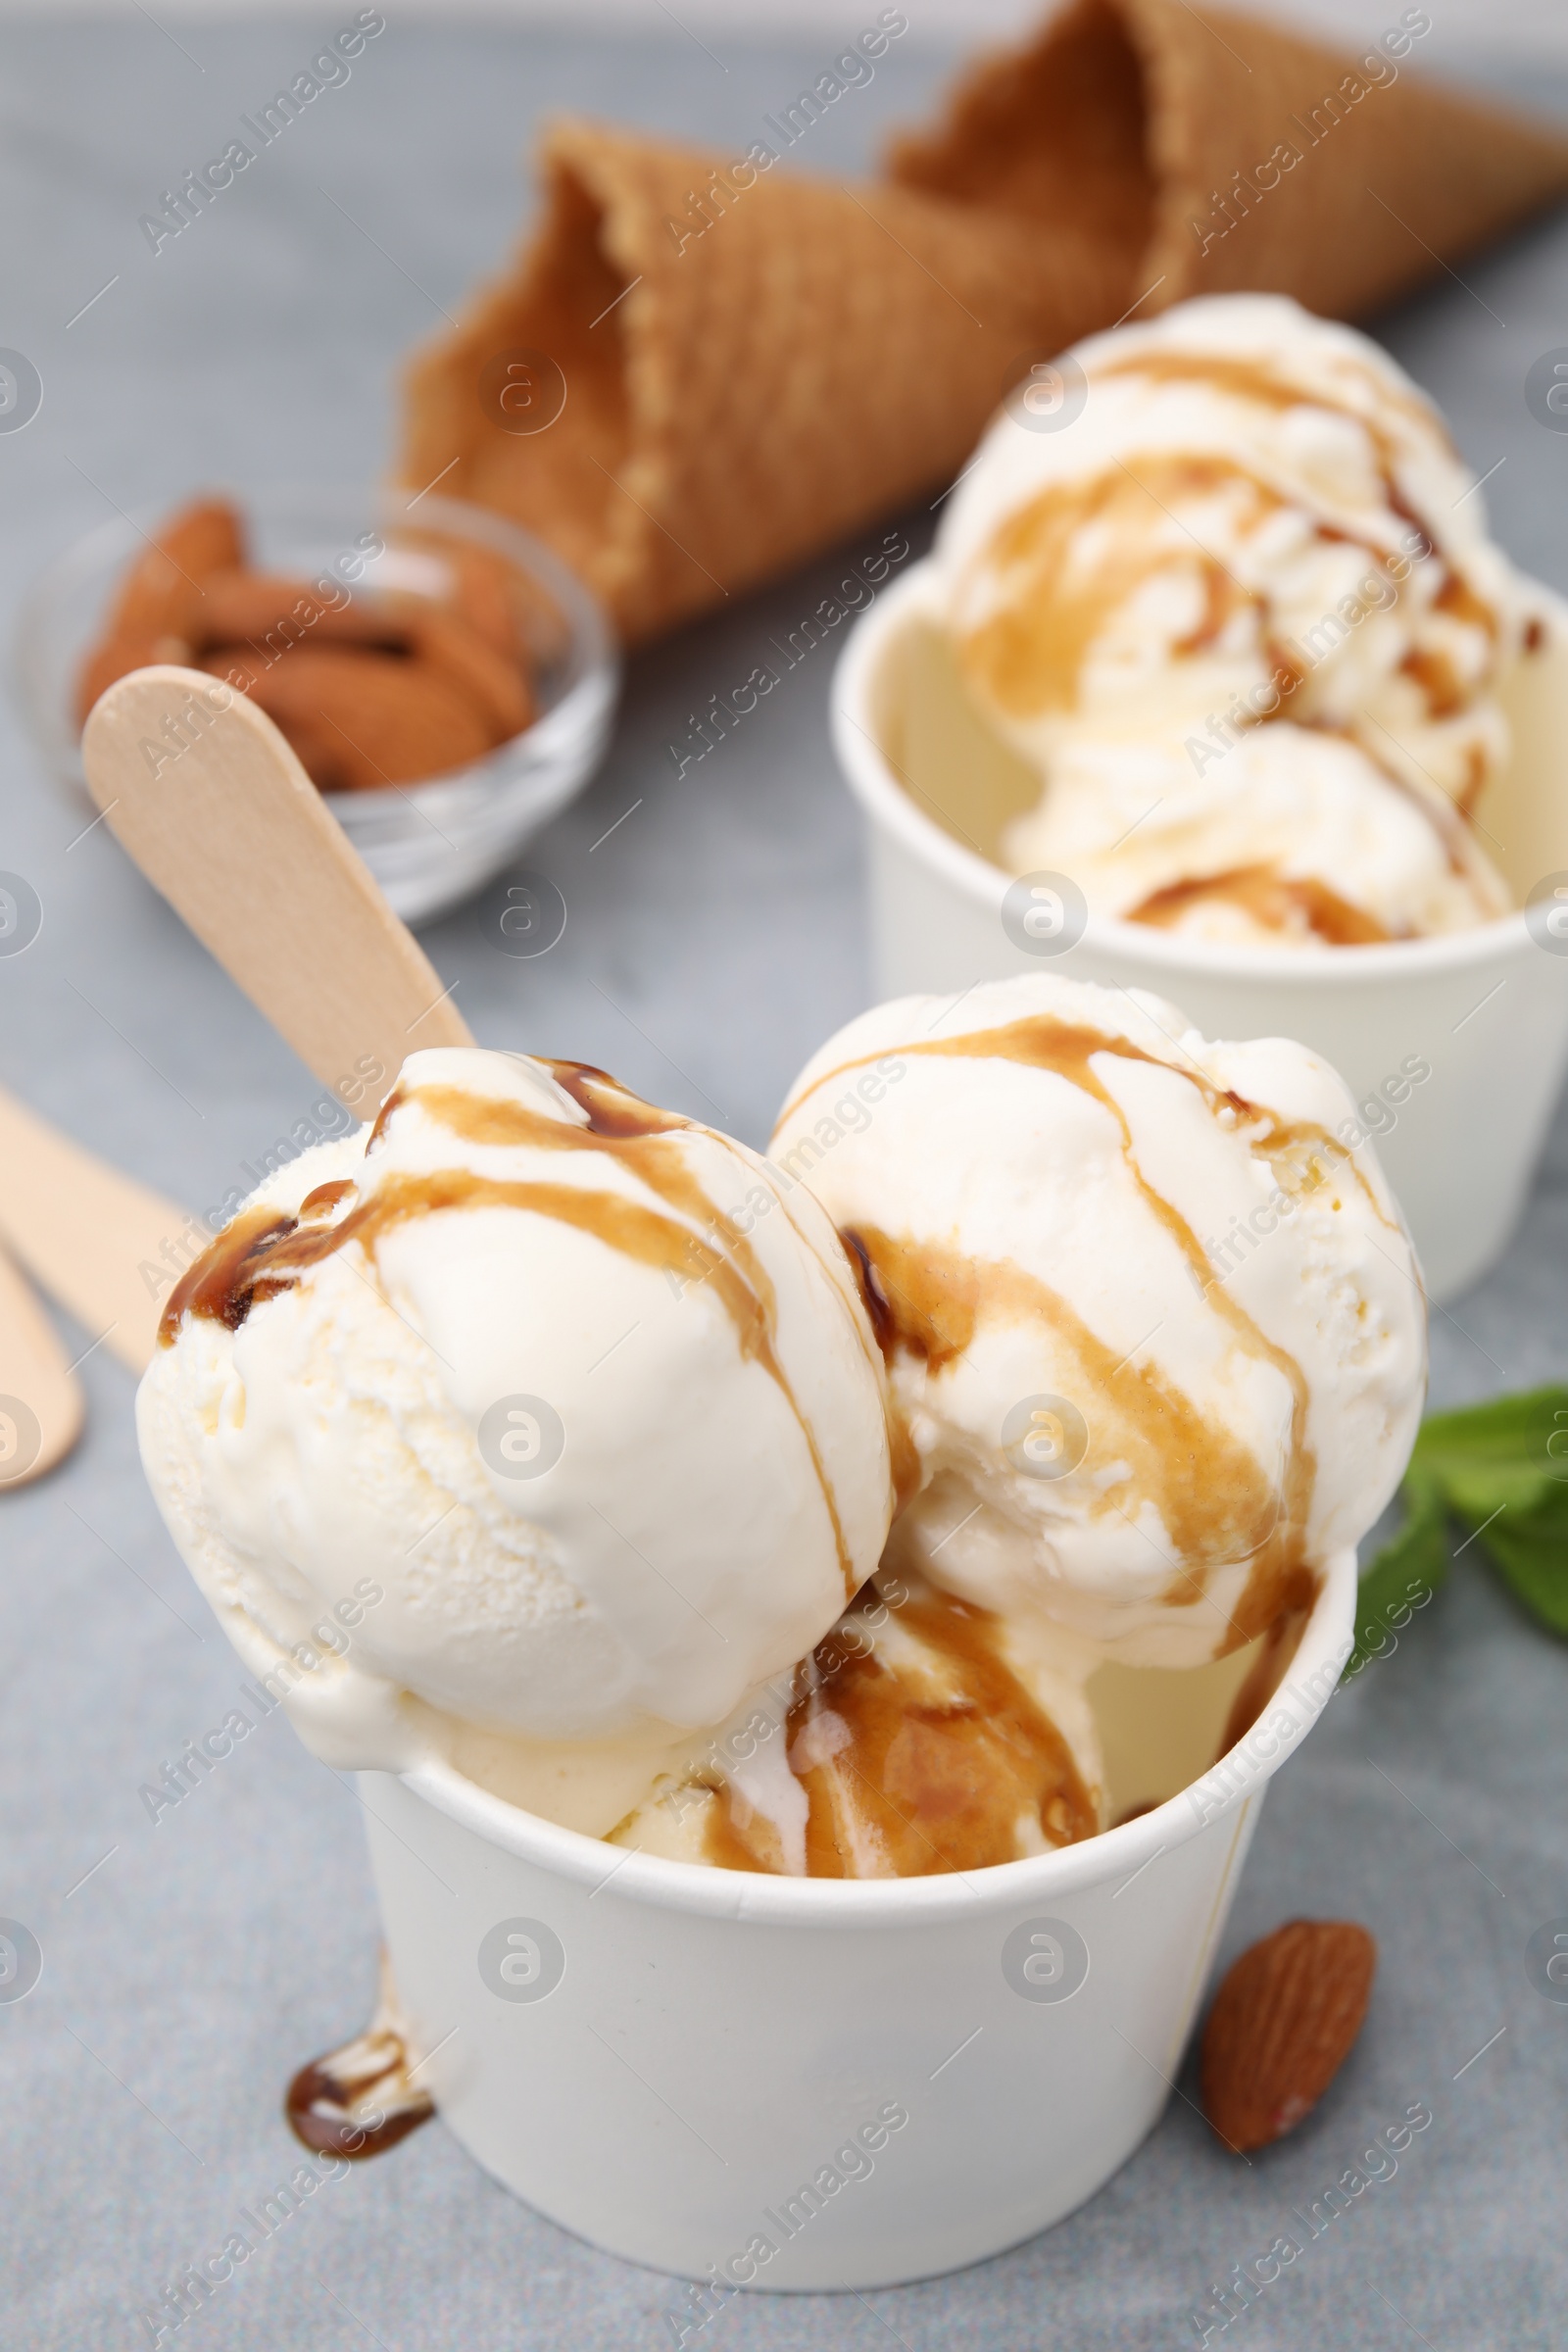 Photo of Scoops of ice cream with caramel sauce in paper cup on light grey table, closeup